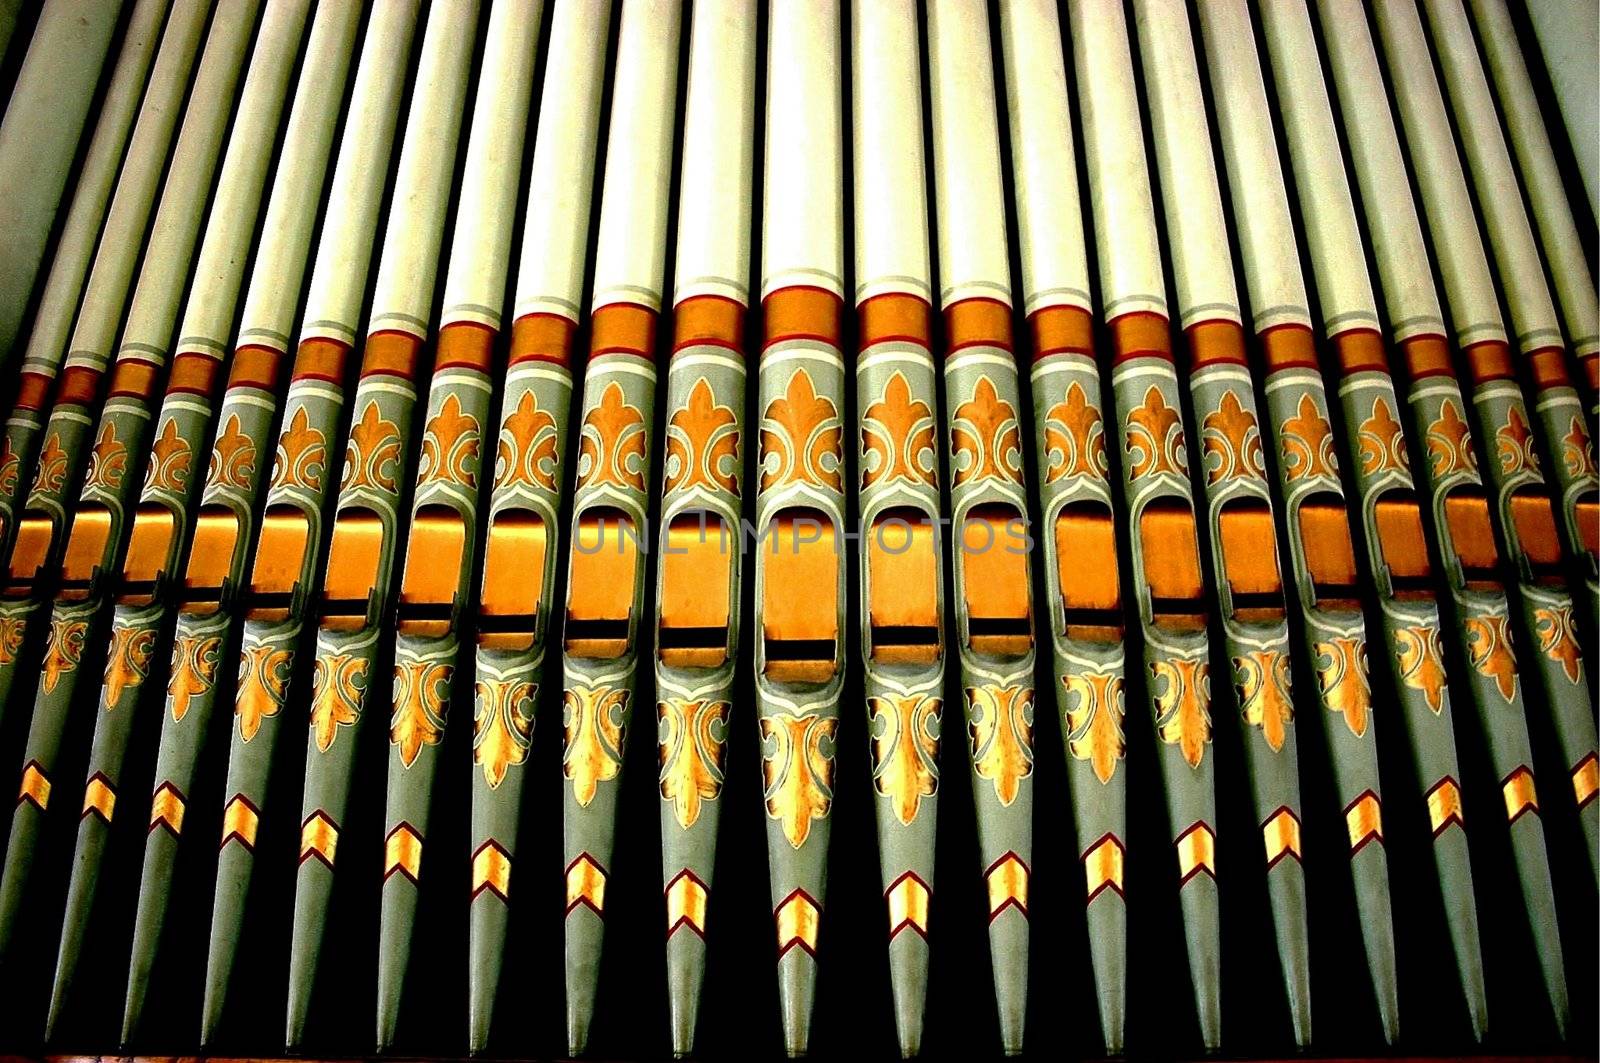 Close up view of pipes from a church organ